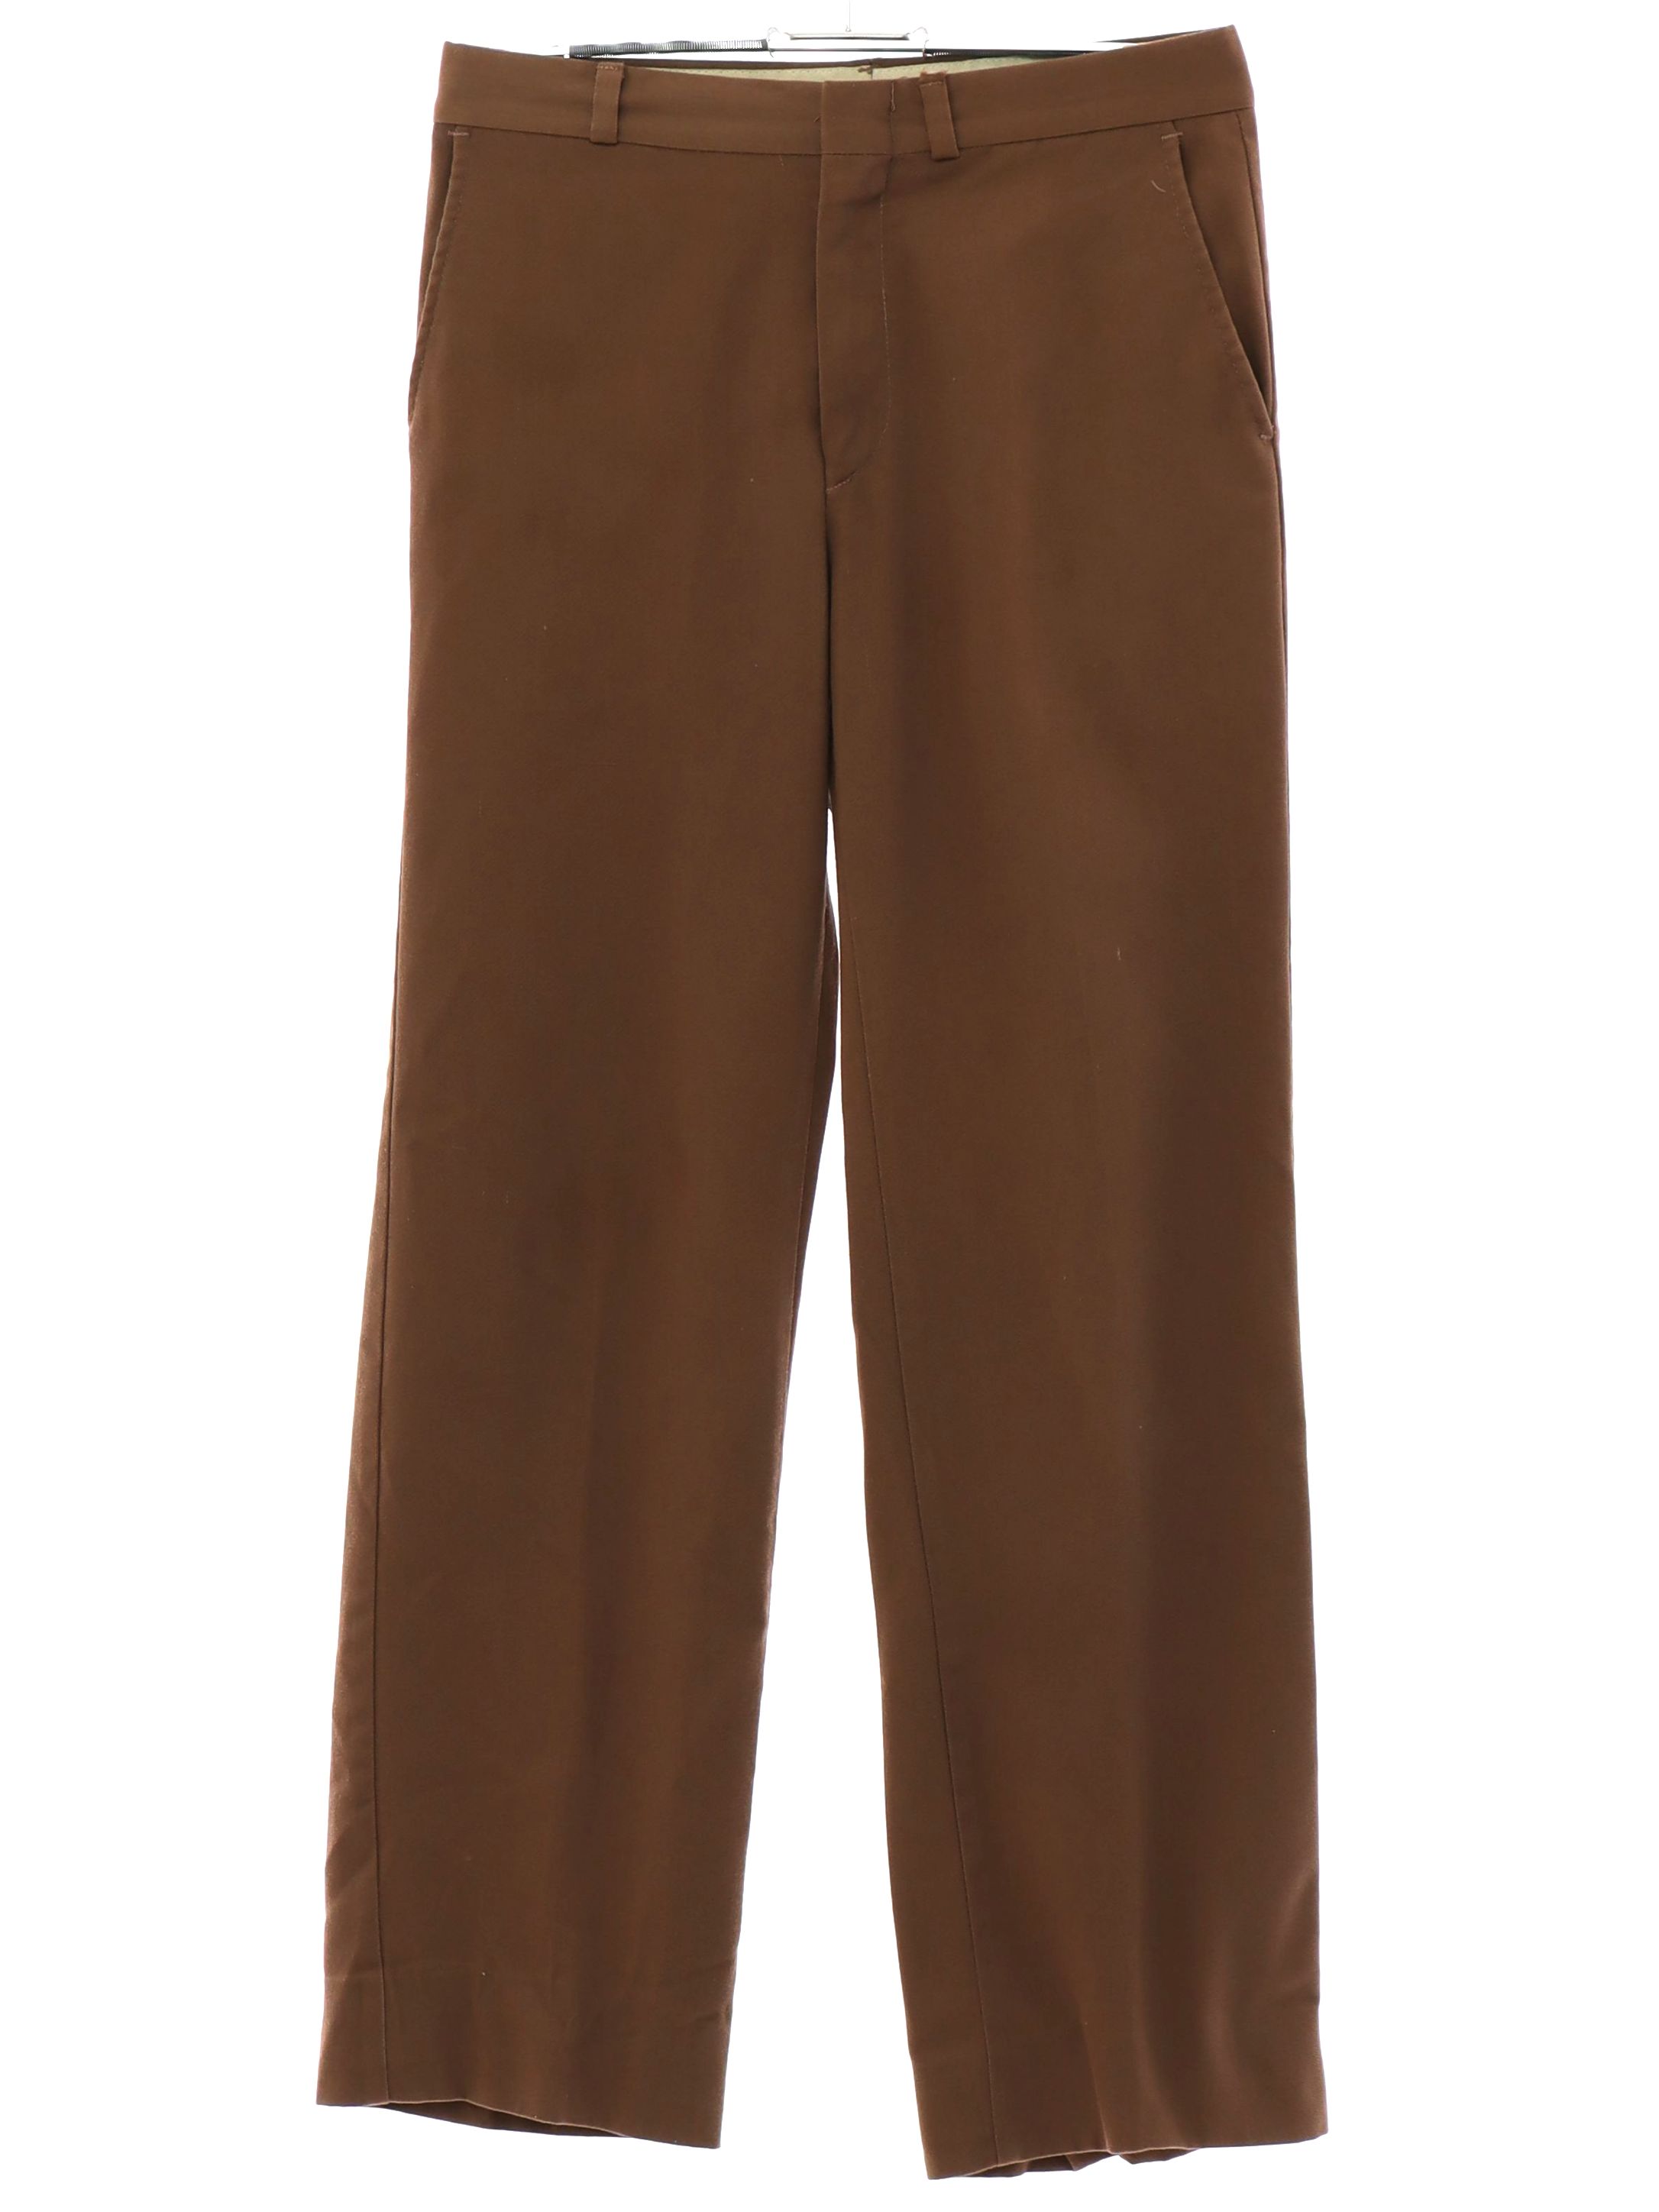 Retro Eighties Pants: 80s -B.P. Britches- Mens brown solid colored ...